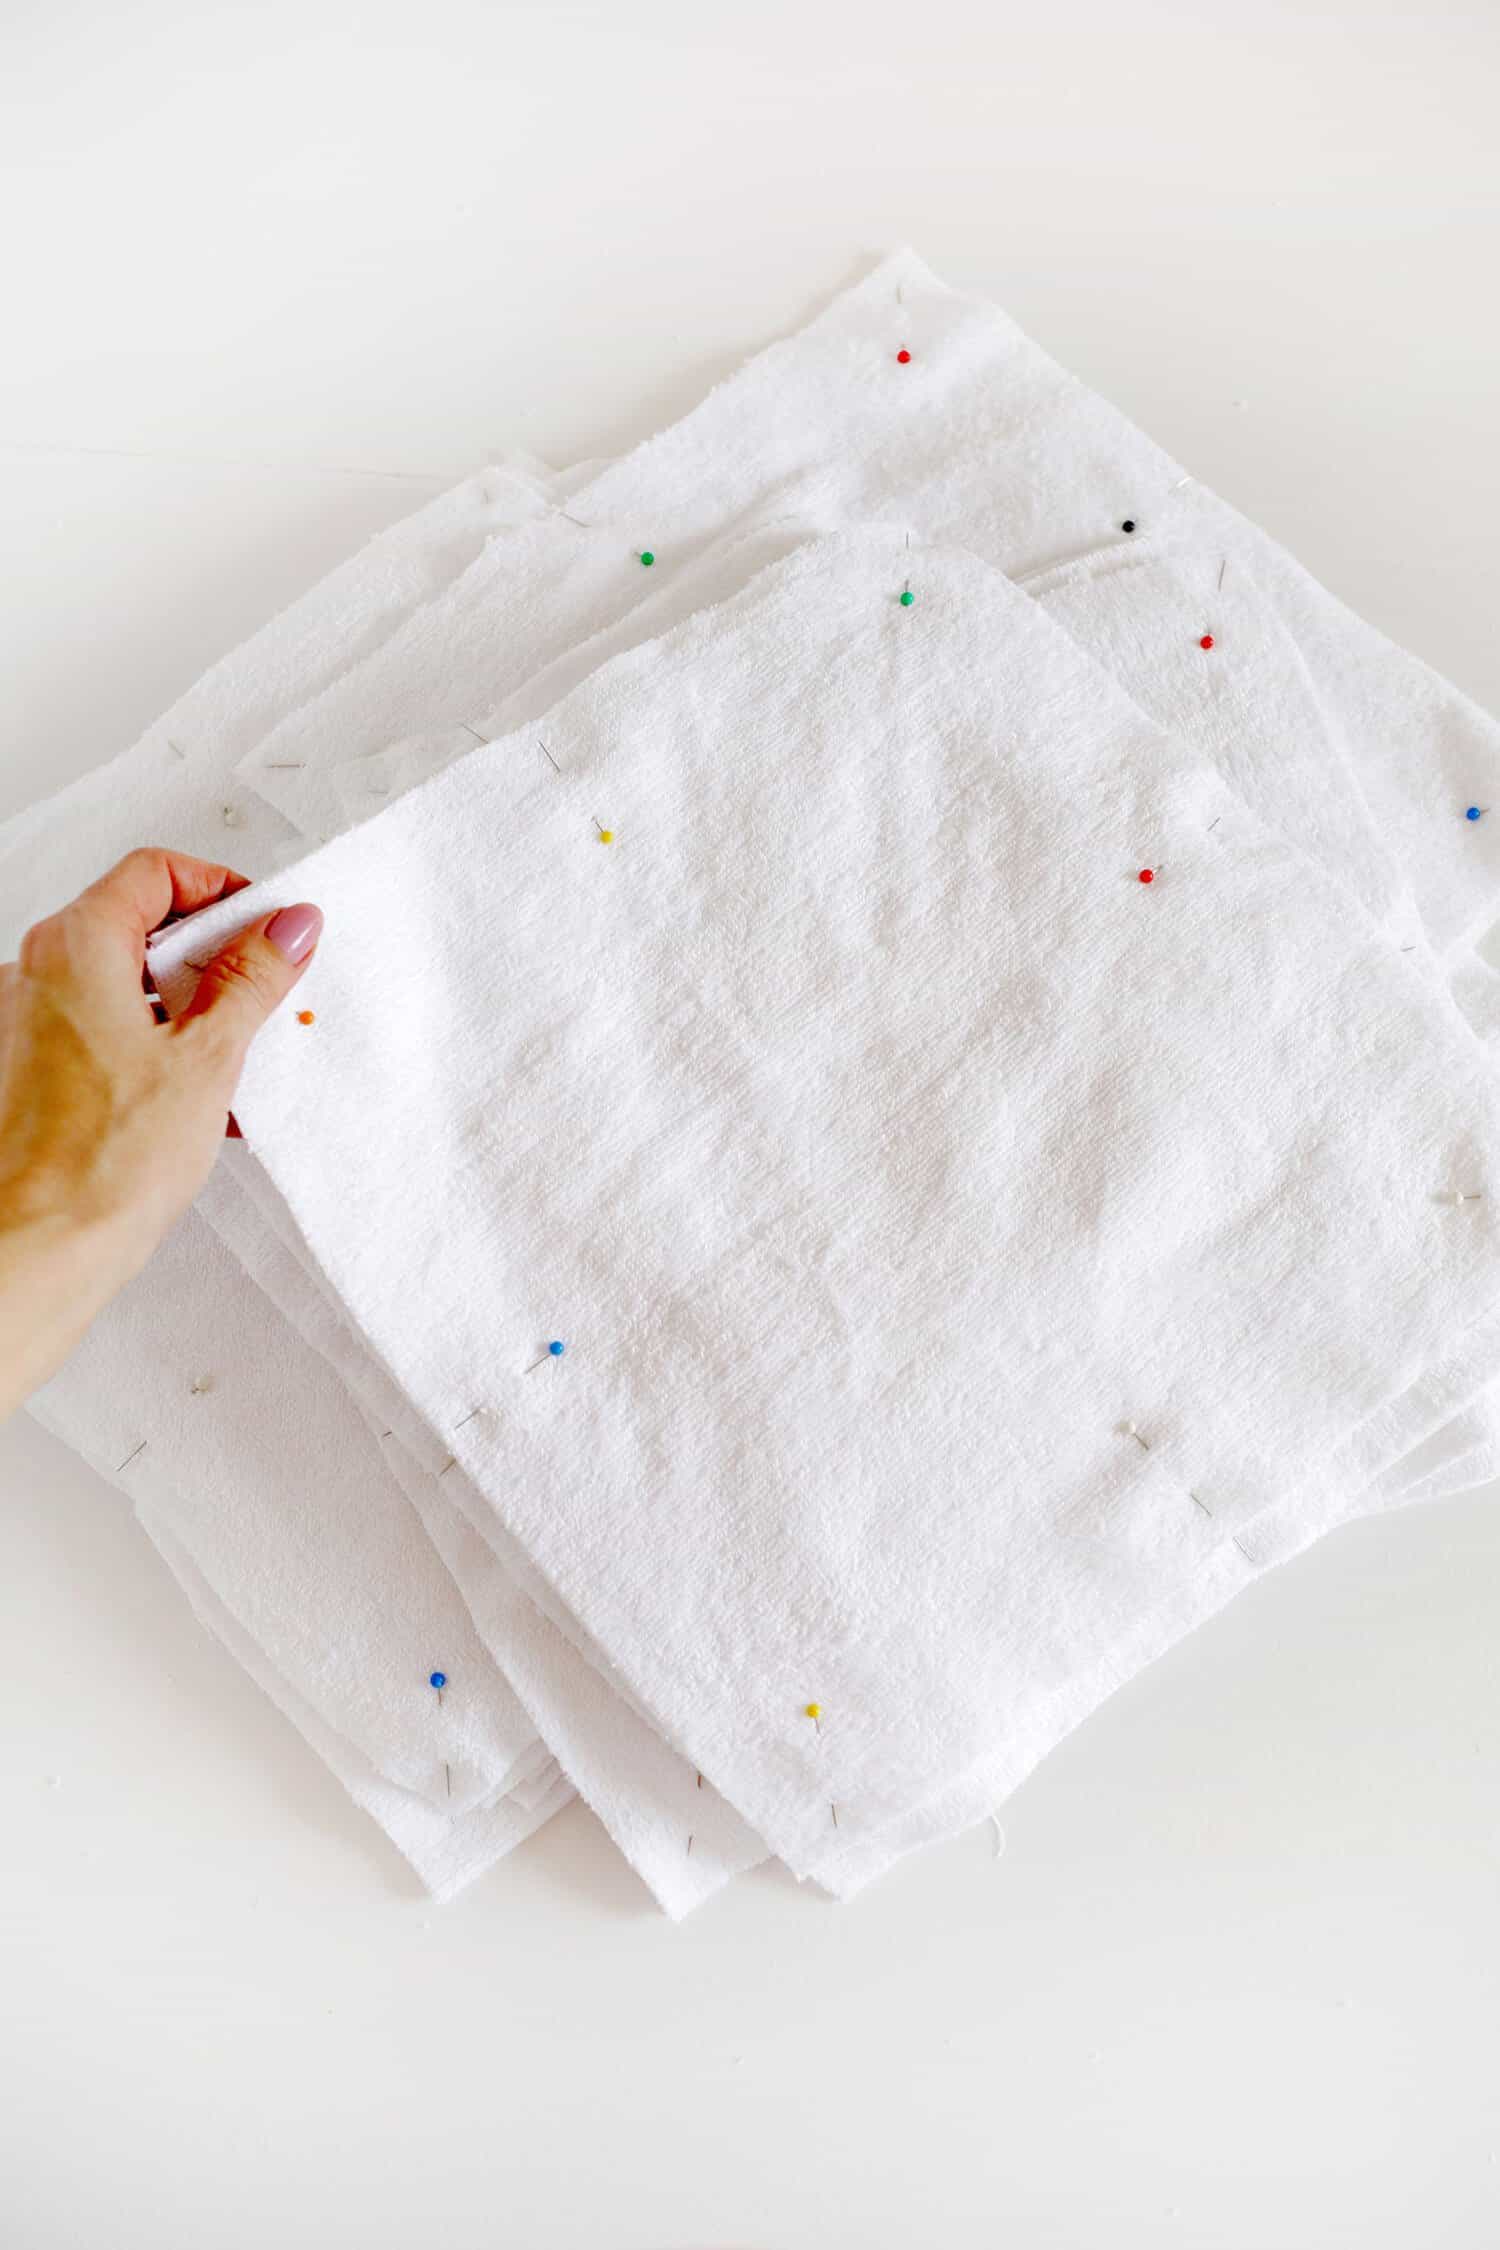 Sample only of White Paperless Towels Organic Paperless Towels Baby Wipes or Bamboo Wipes 